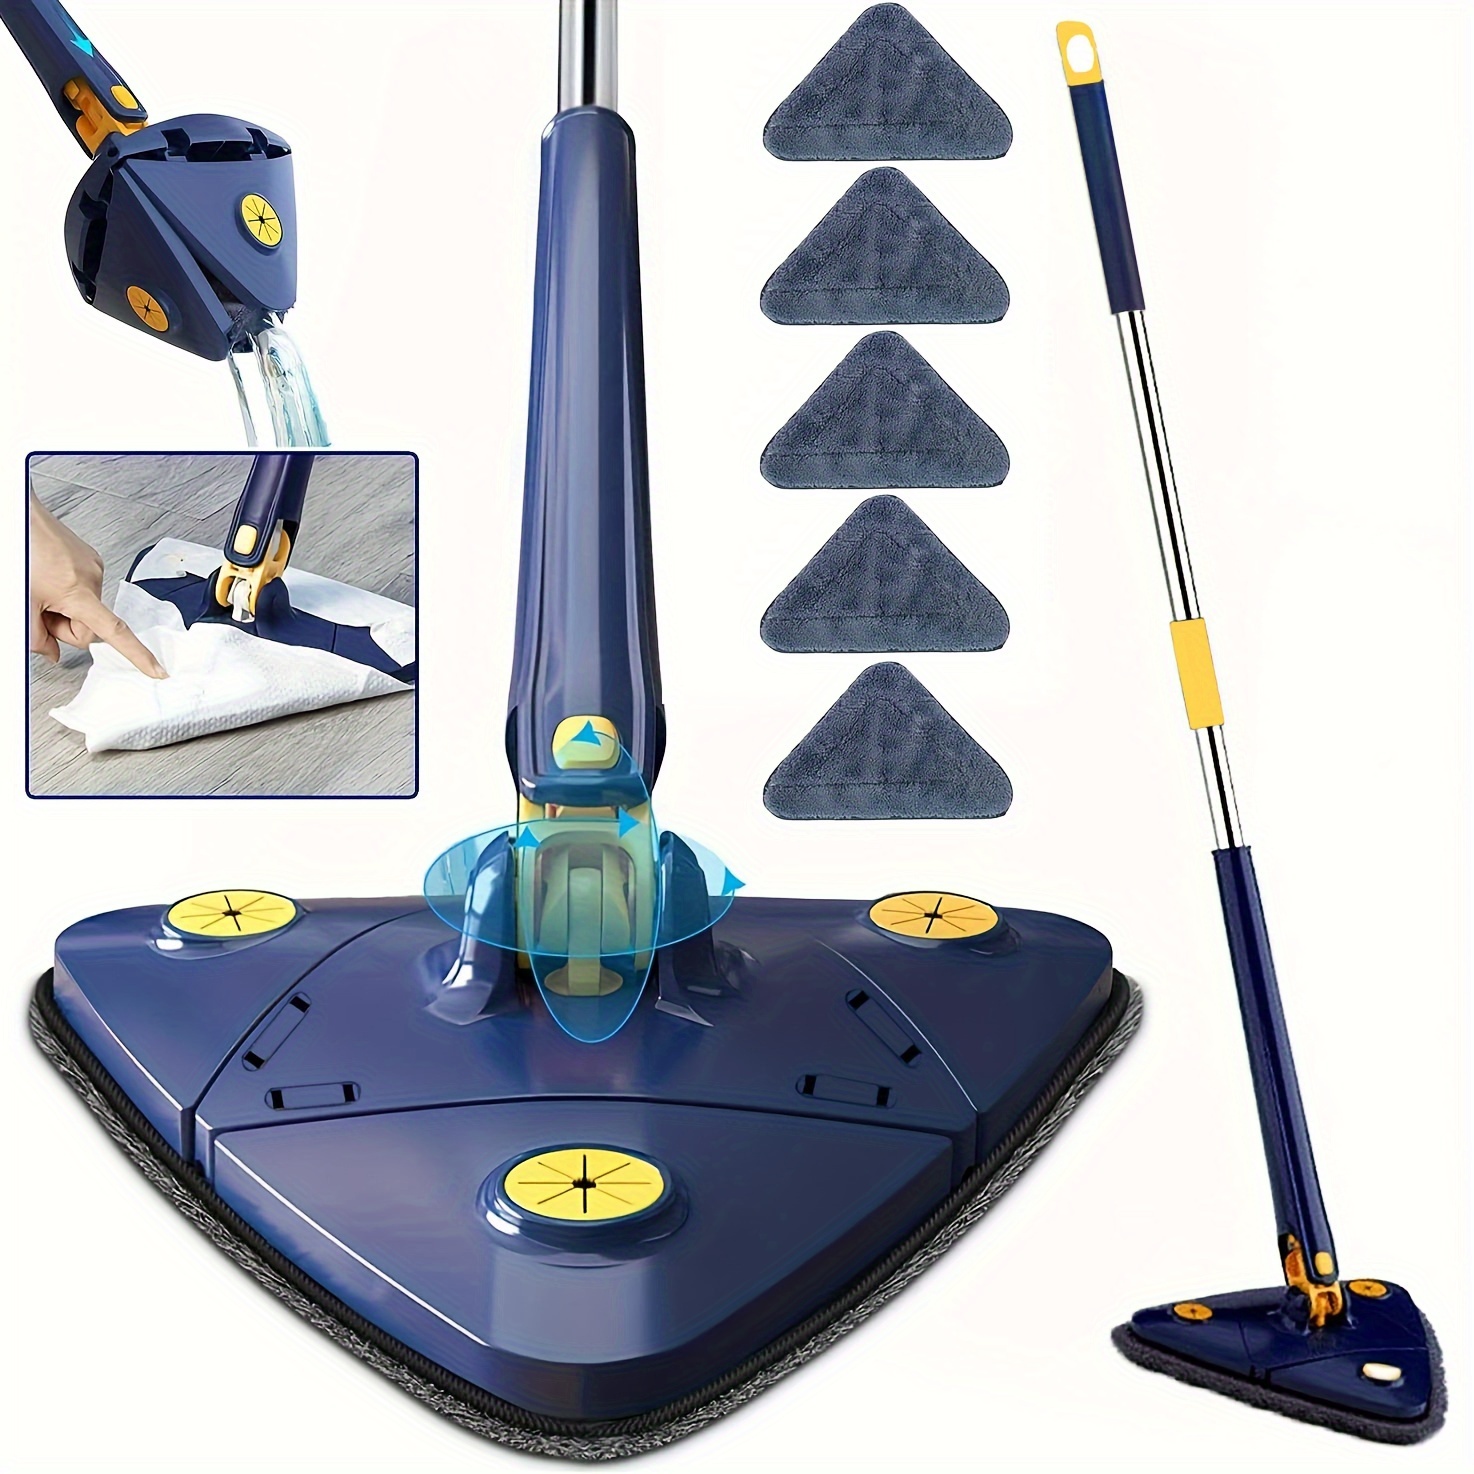 

Triangular Rotating Adjustable Cleaning Mop, Hand Twist Quick-dry, Automatic Water Squeezing, Premium Microfiber Cloth Heads, 44.8 Inches Multi-surface Floor, Ceiling, Wall Cleaner